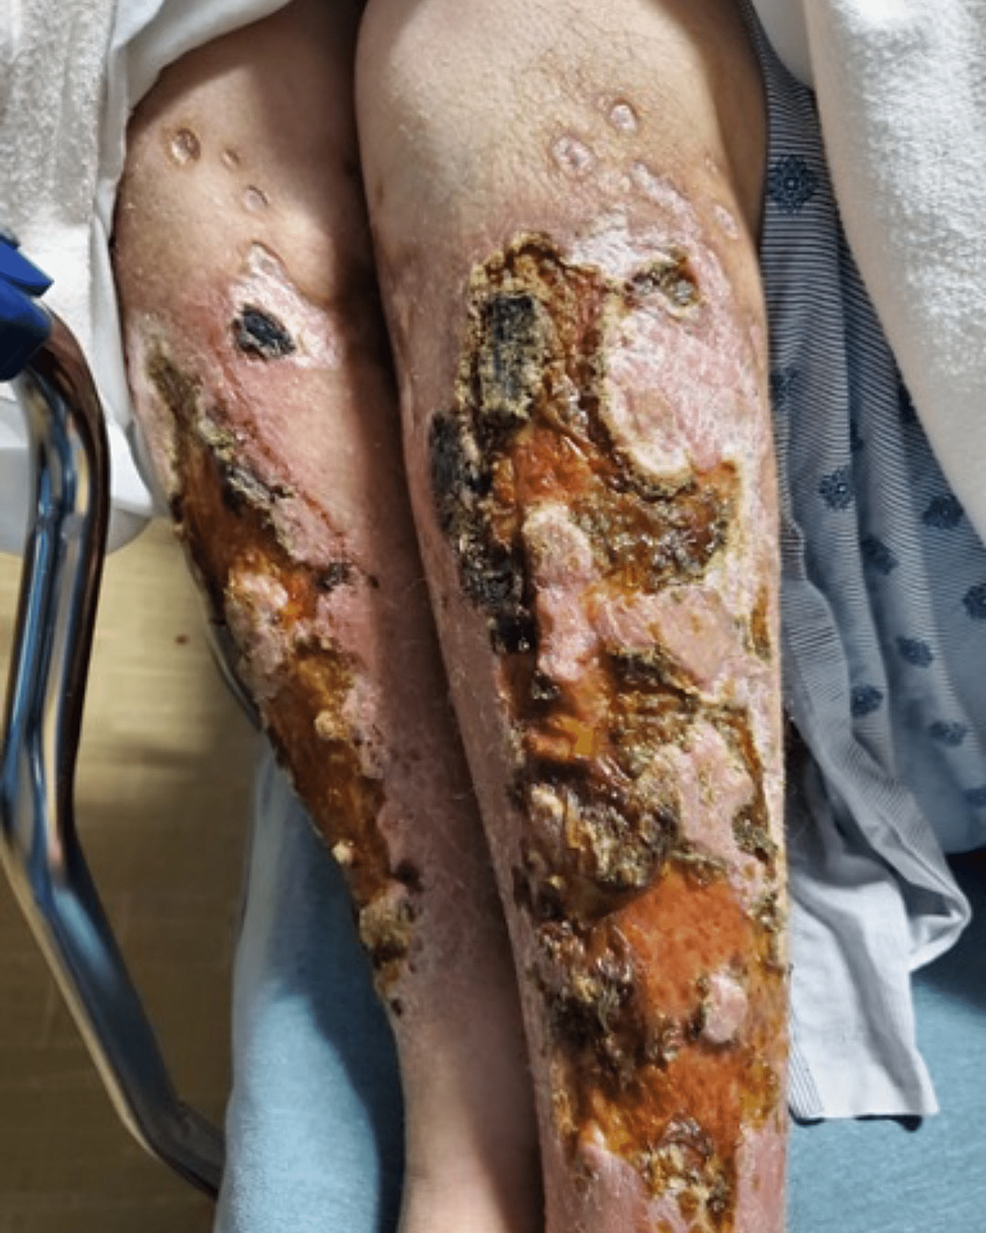 Heroin-induced-skin-necrosis-on-ventral-bilateral-lower-extremities-with-coalescing-necrotic-ulcers-and-necrotic-scaling